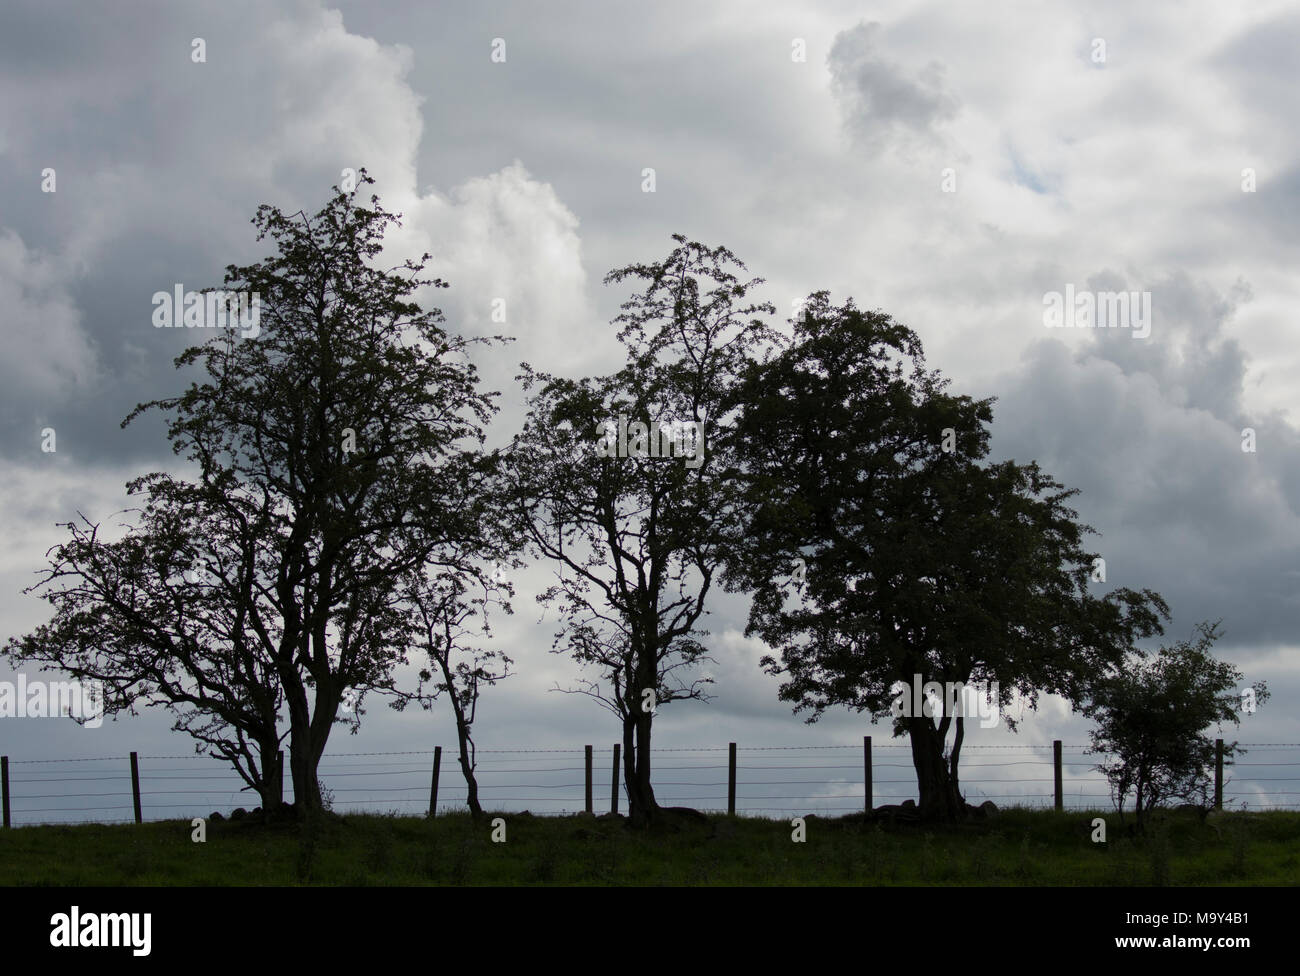 Hawthorn trees (Crataegus monogyna) silhouetted against clouds Stock Photo